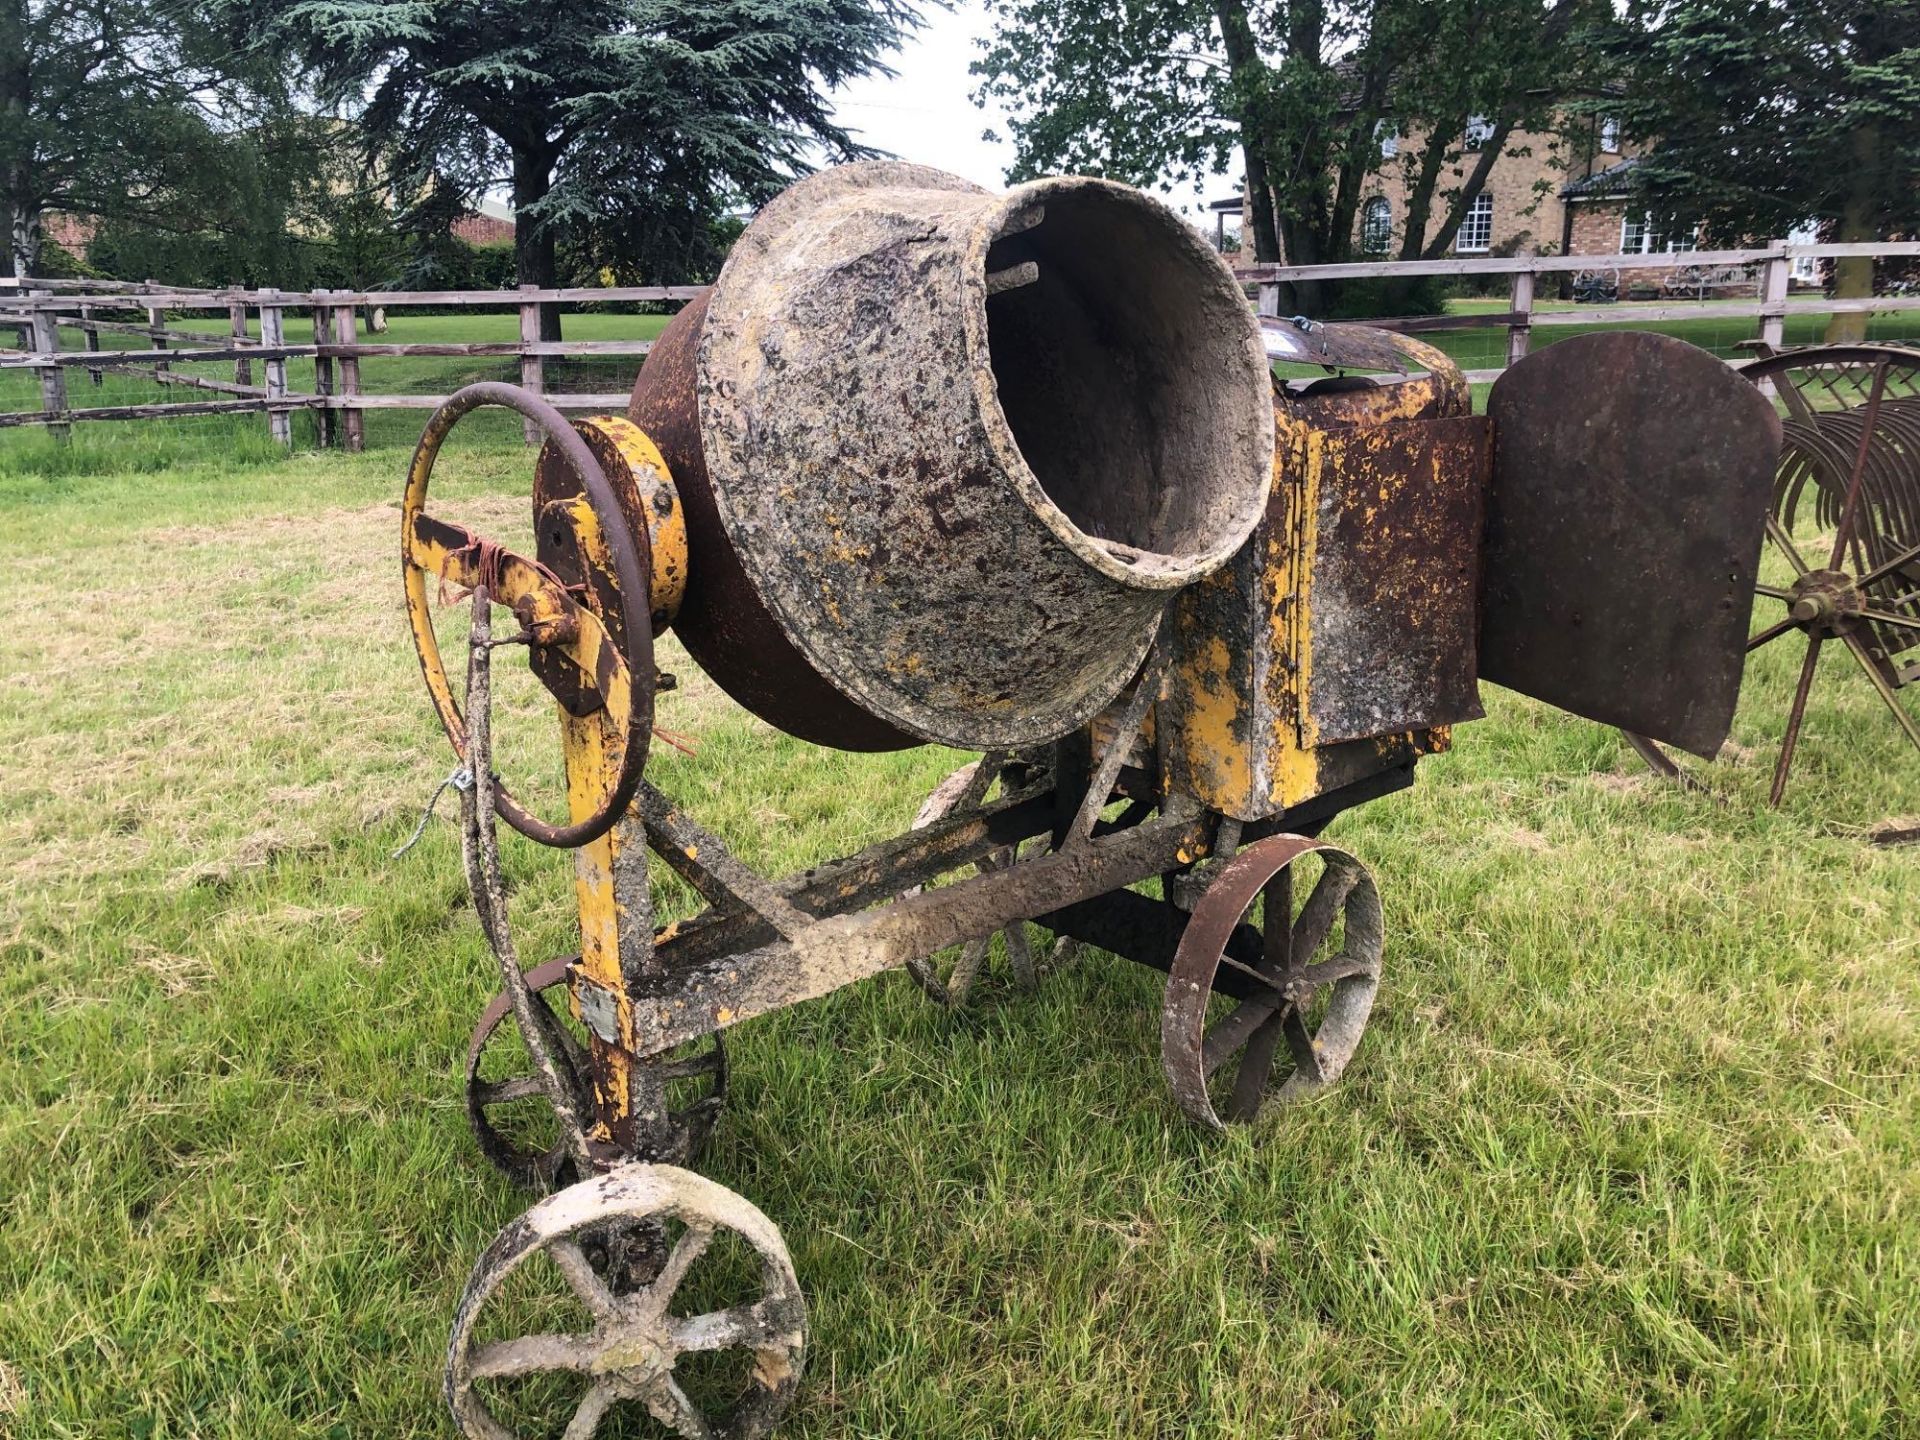 Vintage cement mixer - Image 2 of 3